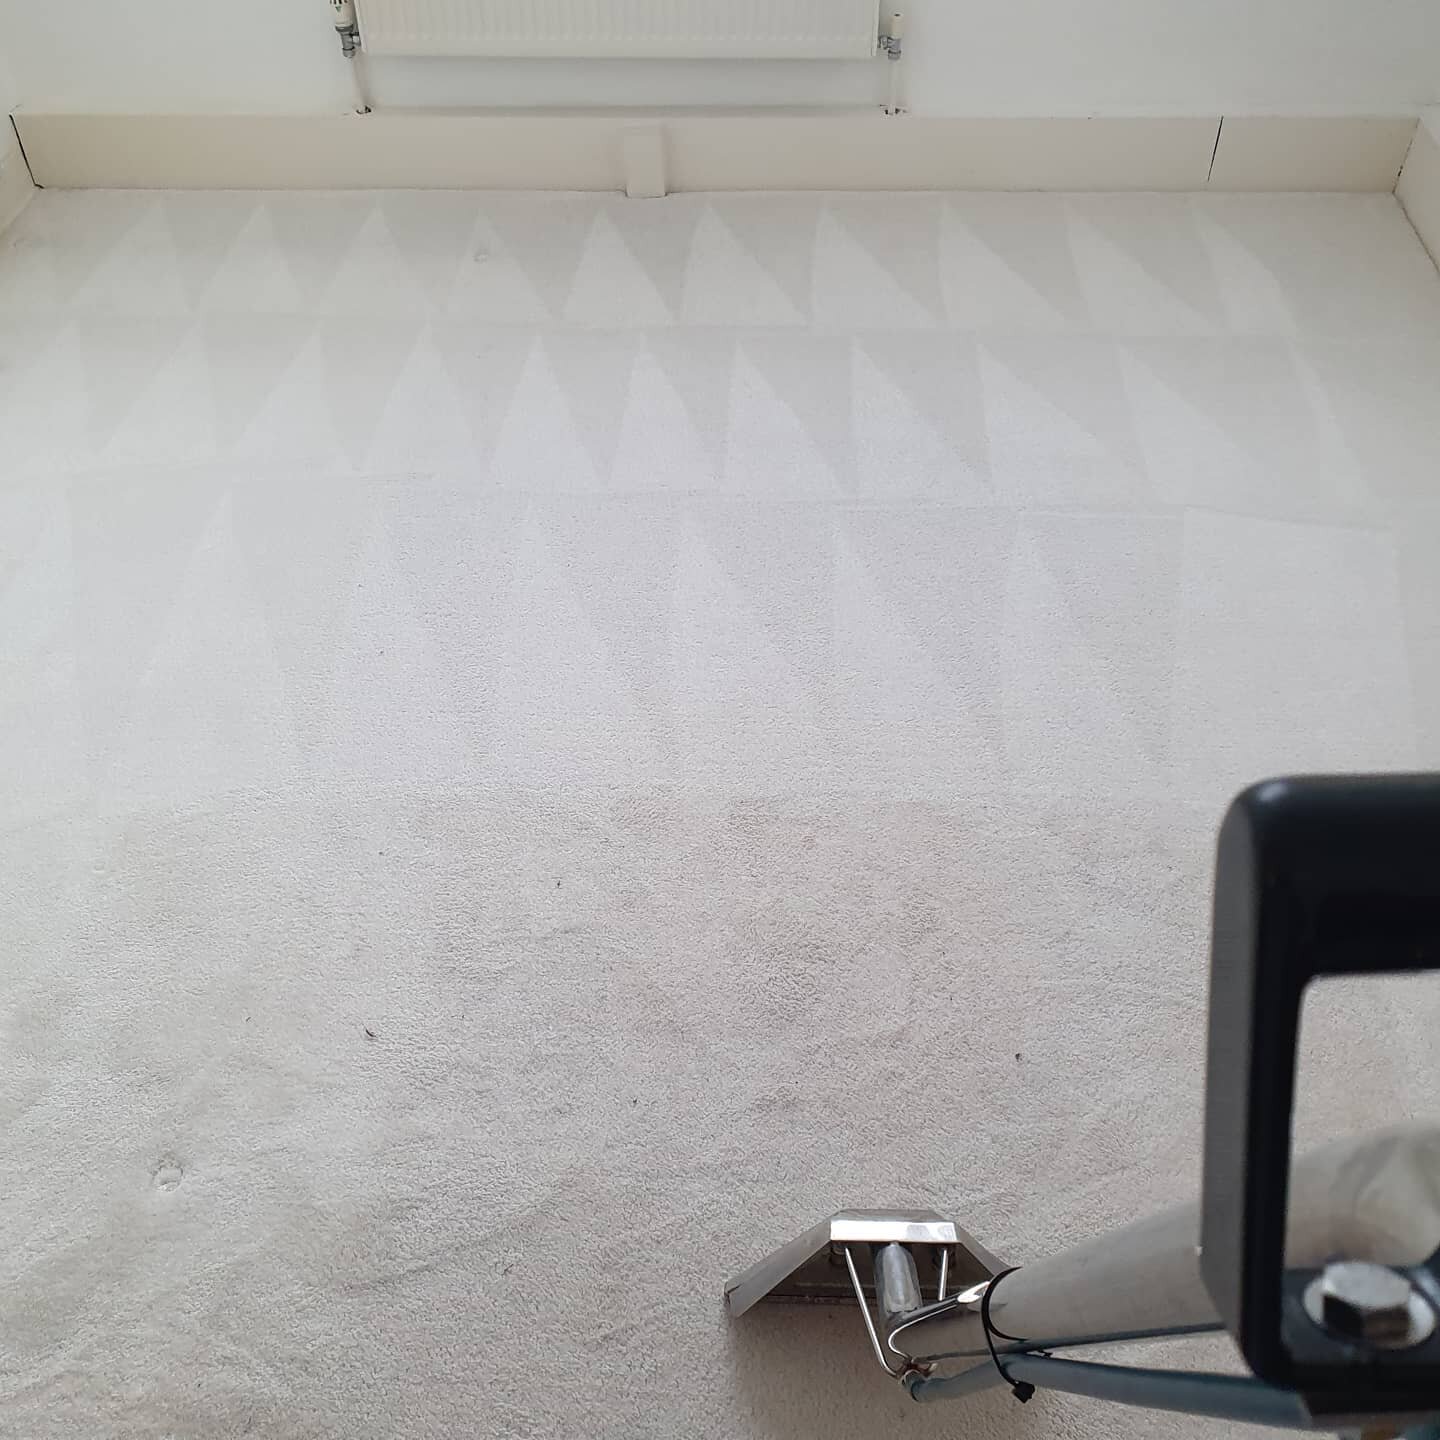 Carpet clean in Eltham today, carpet looked like it just needed a freshen up but wow, still a great result 😄